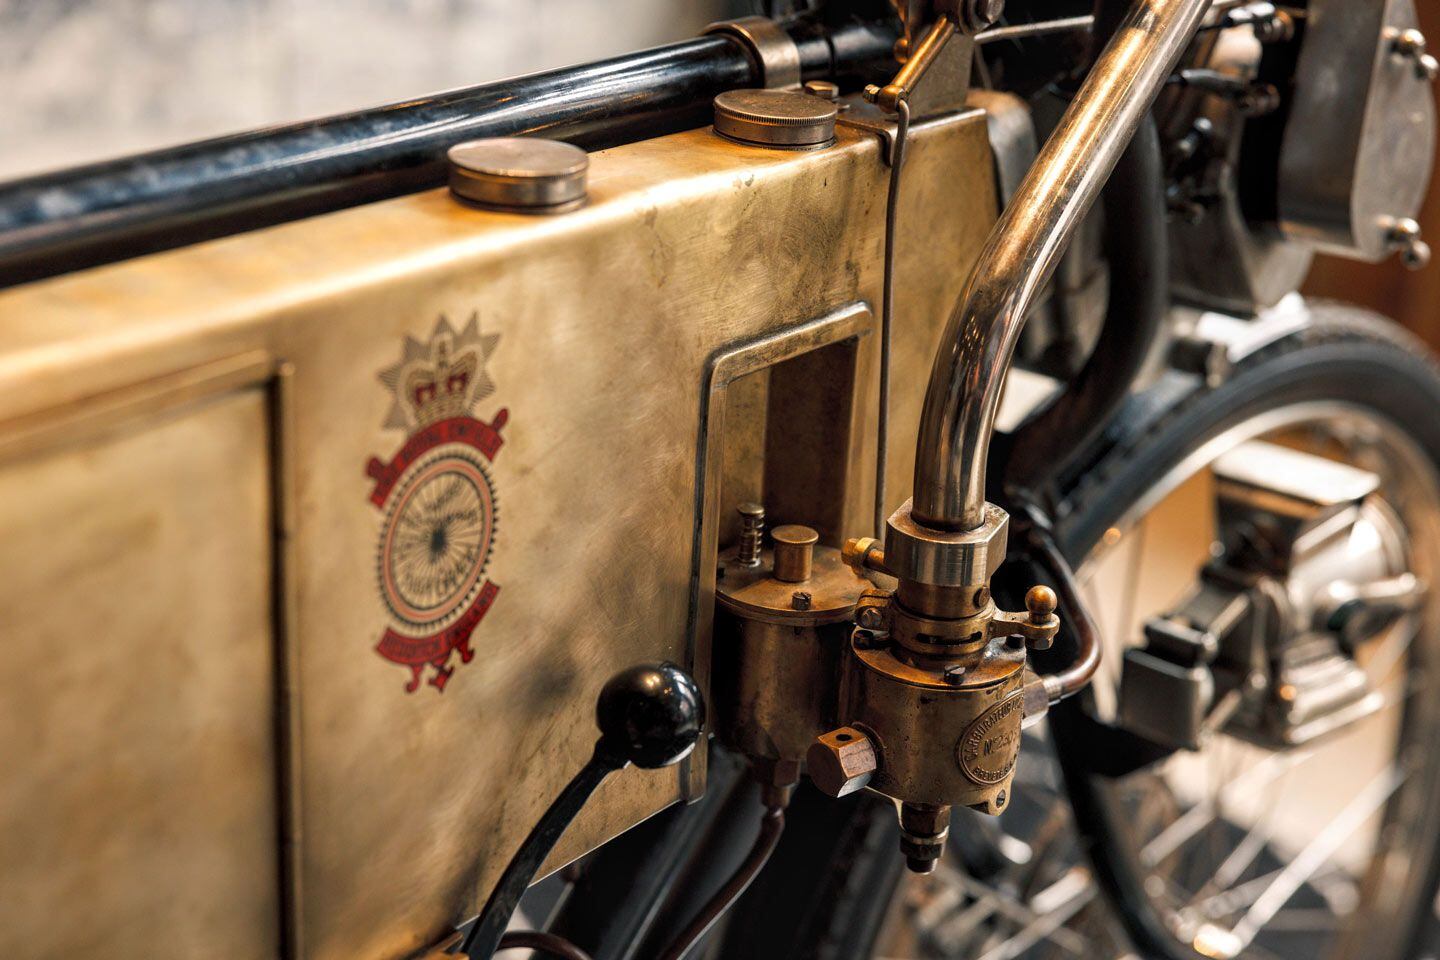 A detail of the carburetor attached to the fuel portion of the brass tank. Note the bleed pipe (right side) coming from exhaust, to help warm the fuel-air mixture.